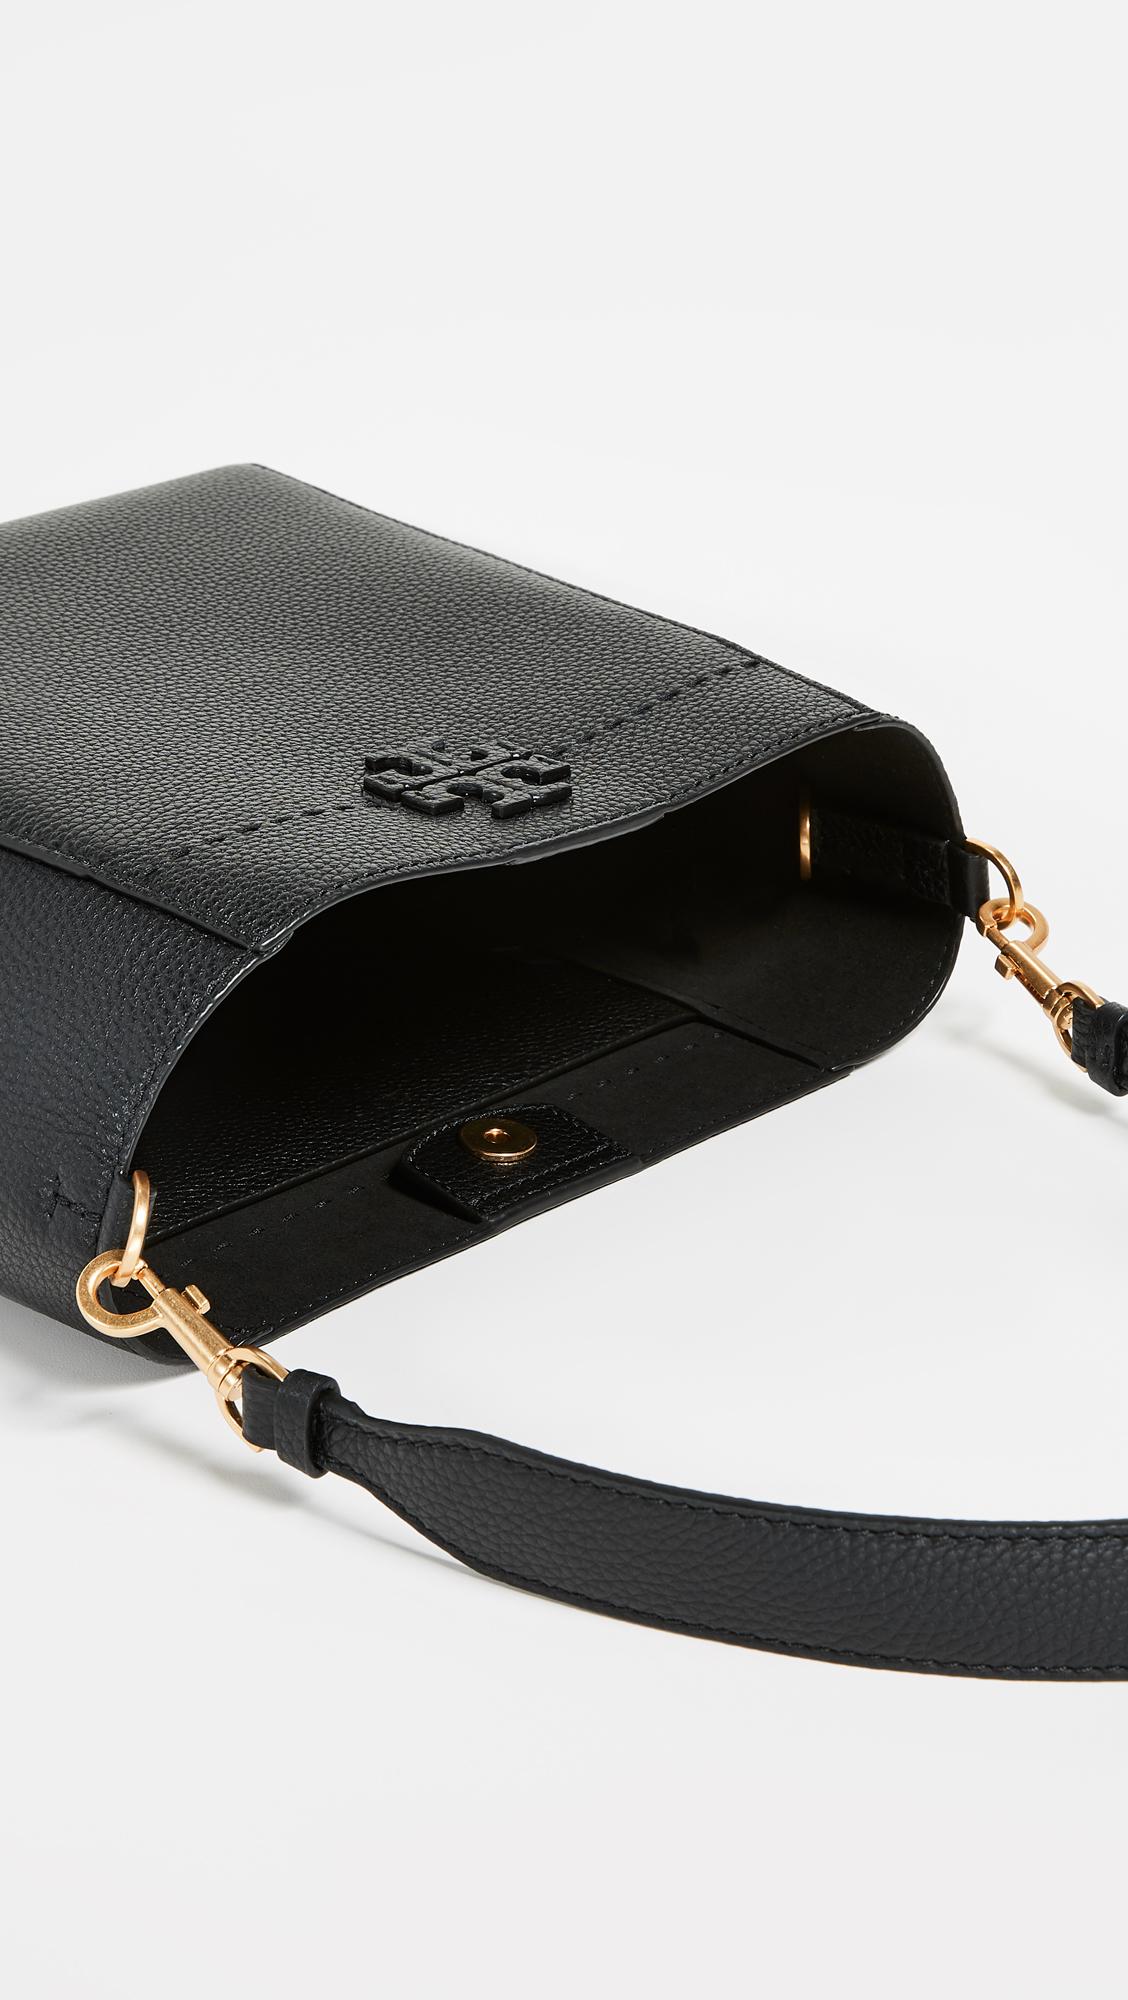 Tory Burch Leather Mcgraw Hobo Bag in Black/Gold (Black ...